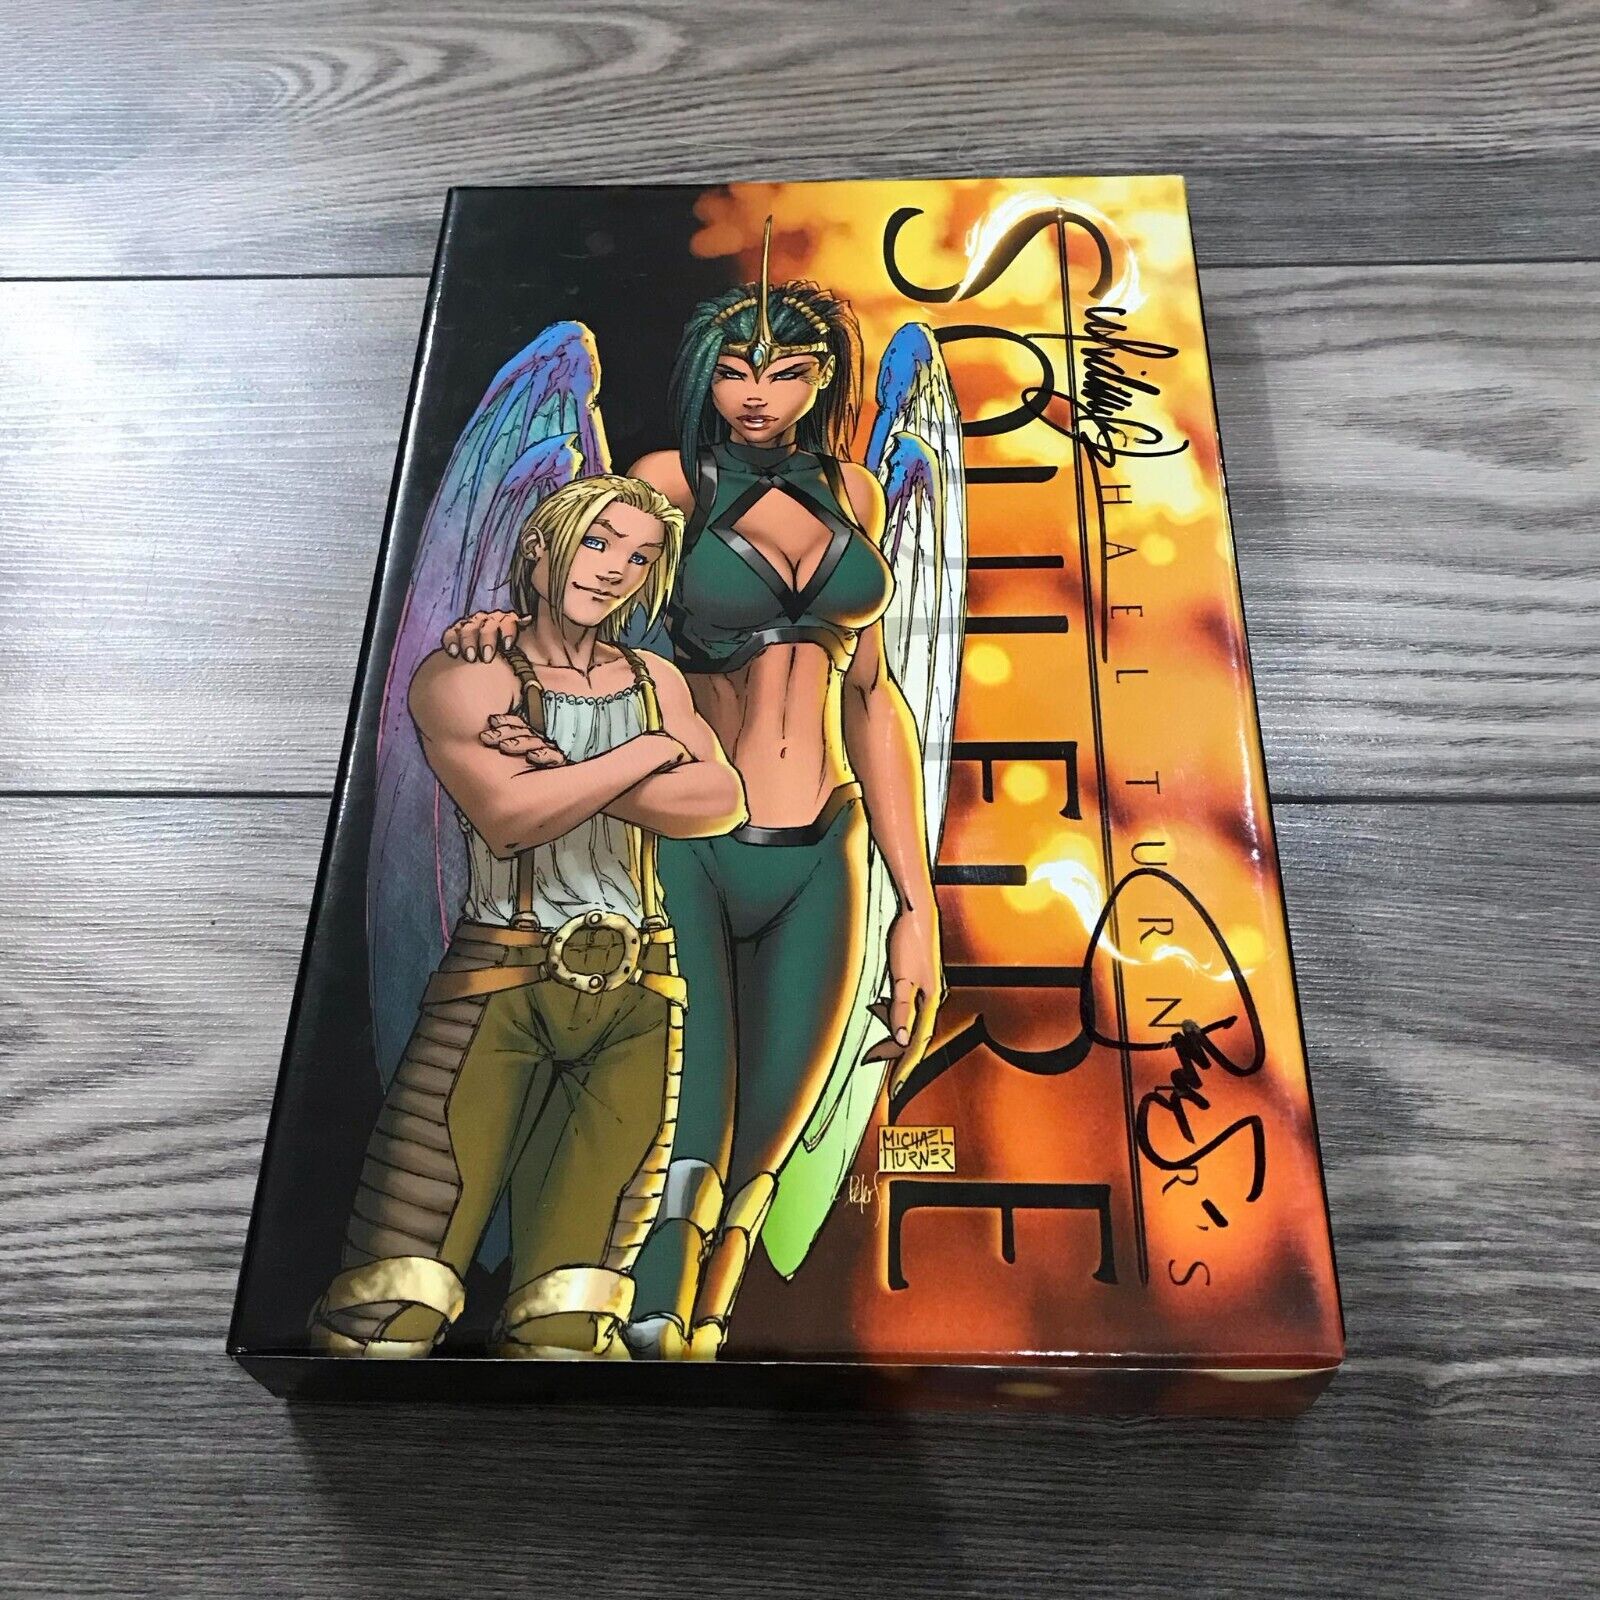 Aspen Soulfire Signed Slipcase Collection Edition - Like New 322/500